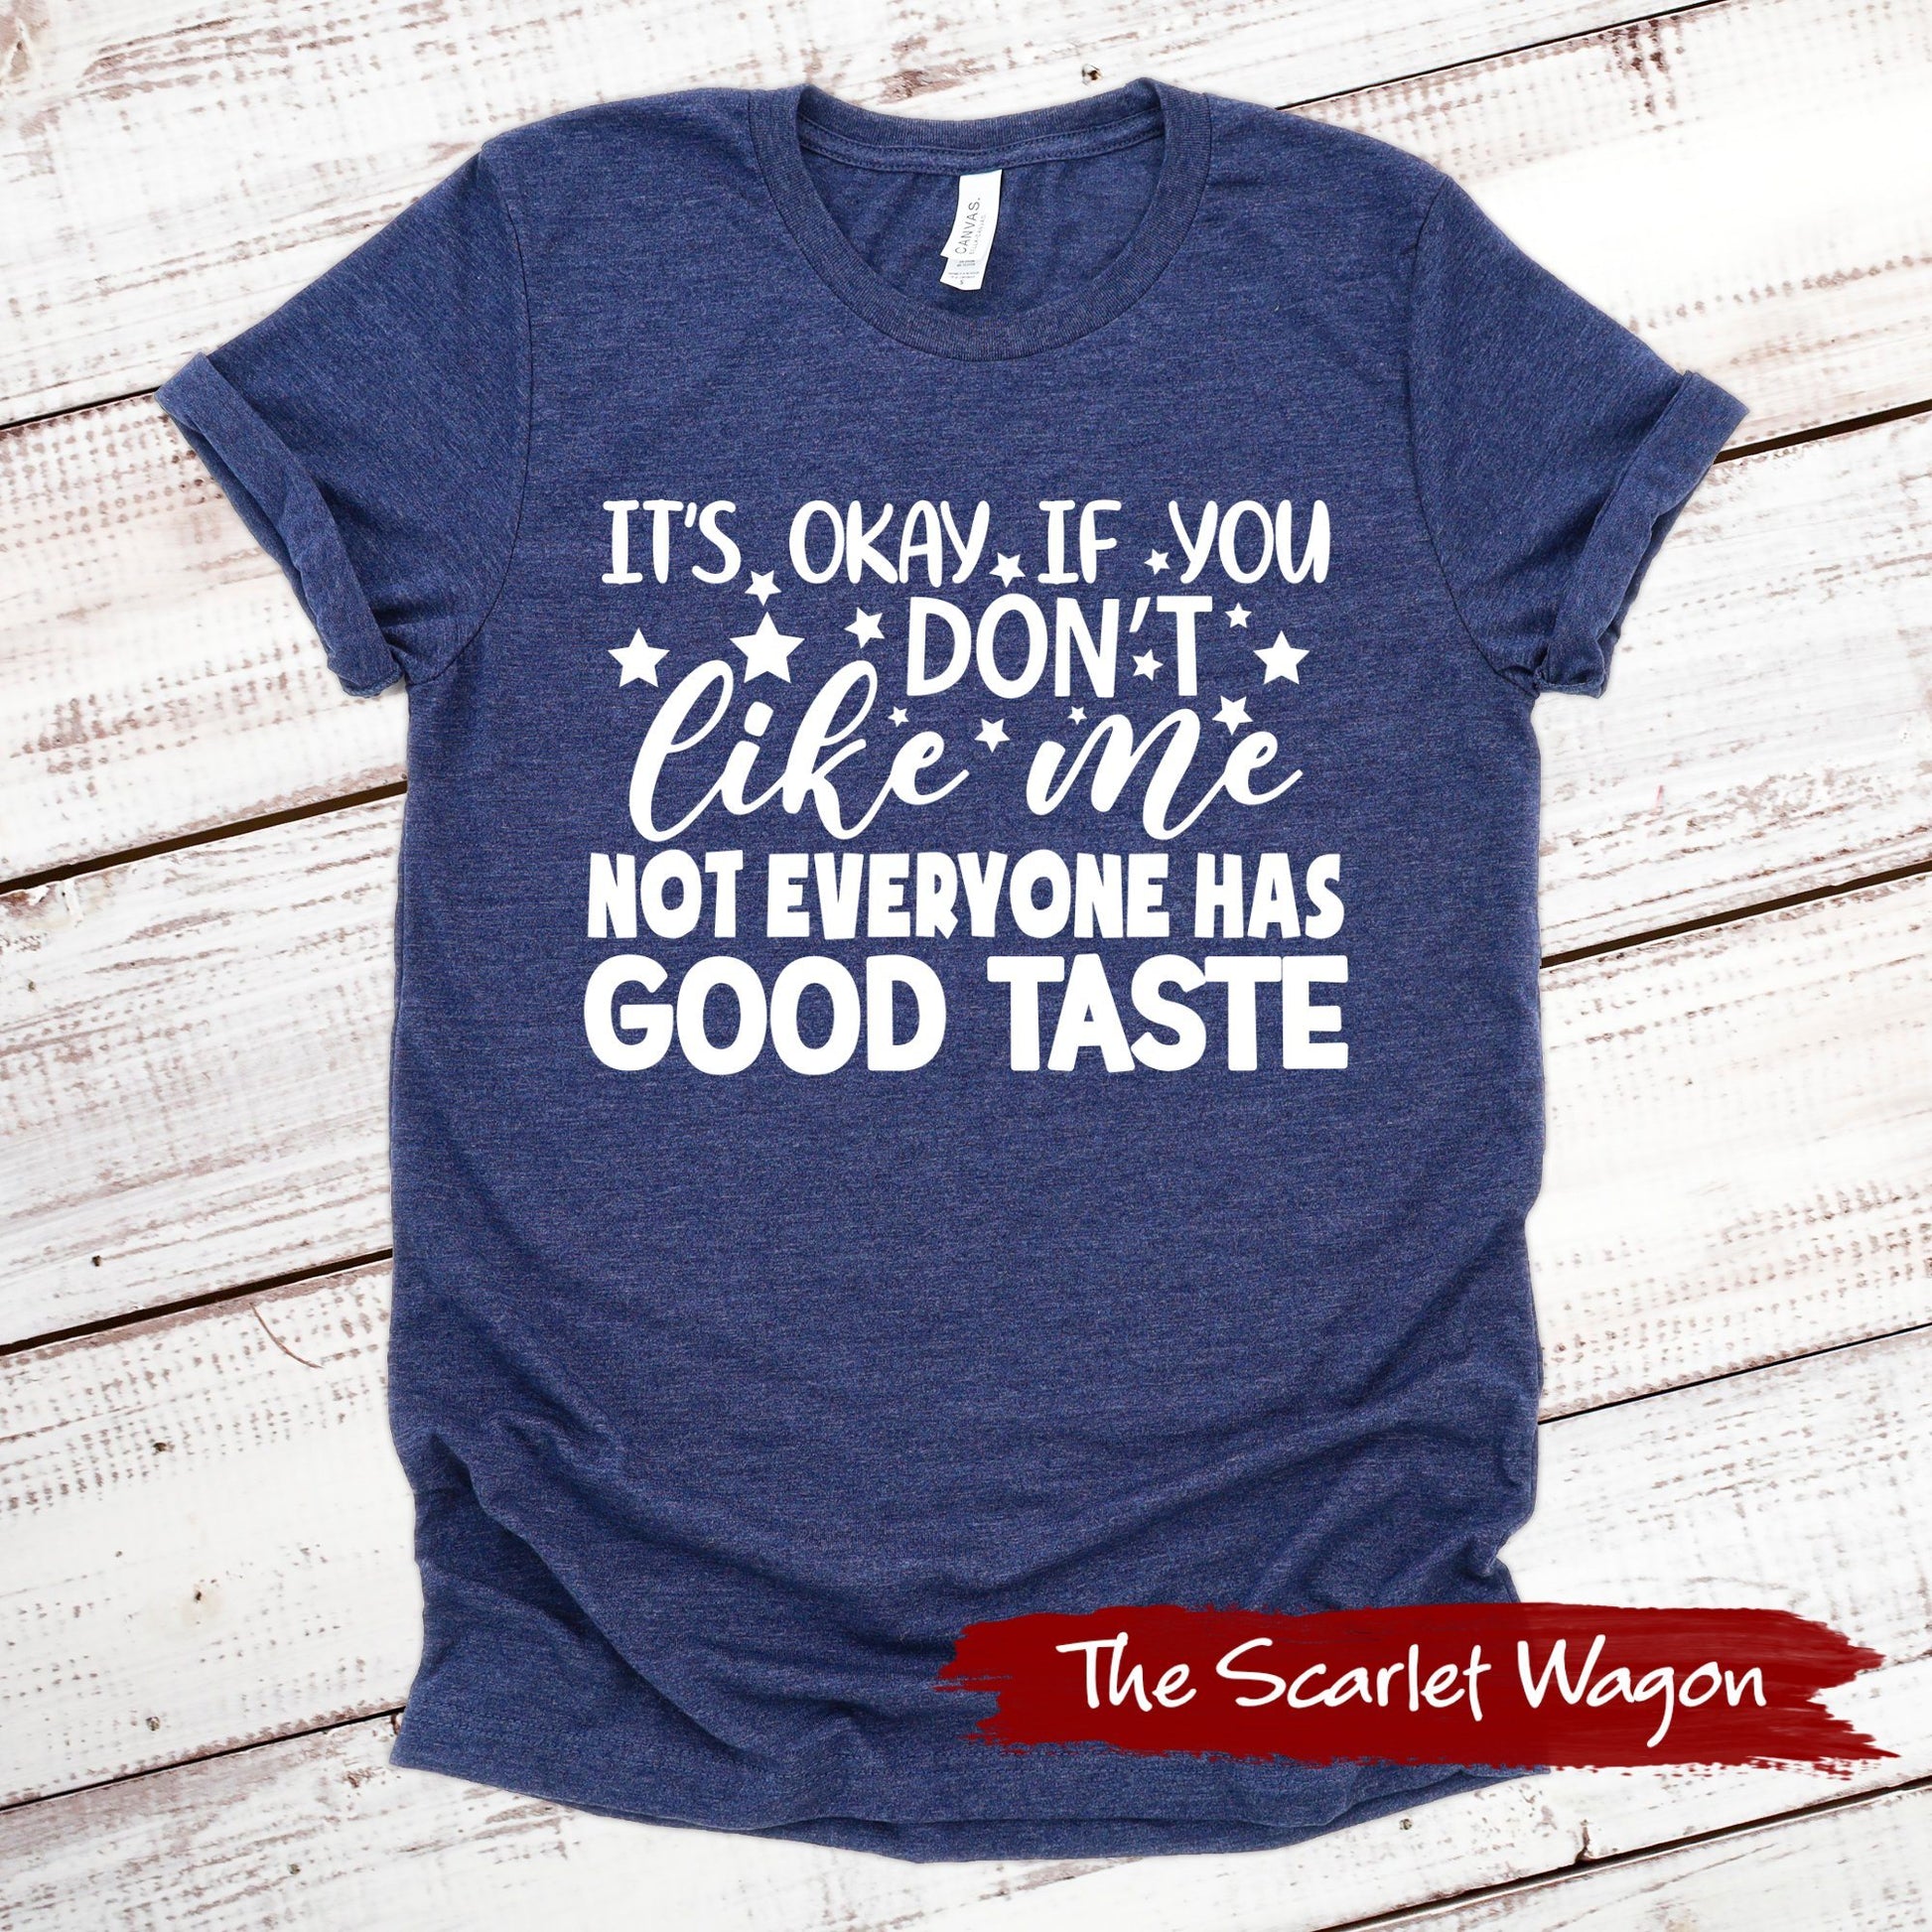 It's Okay if You Don't Like Me Funny Shirt Scarlet Wagon Heather Navy XS 